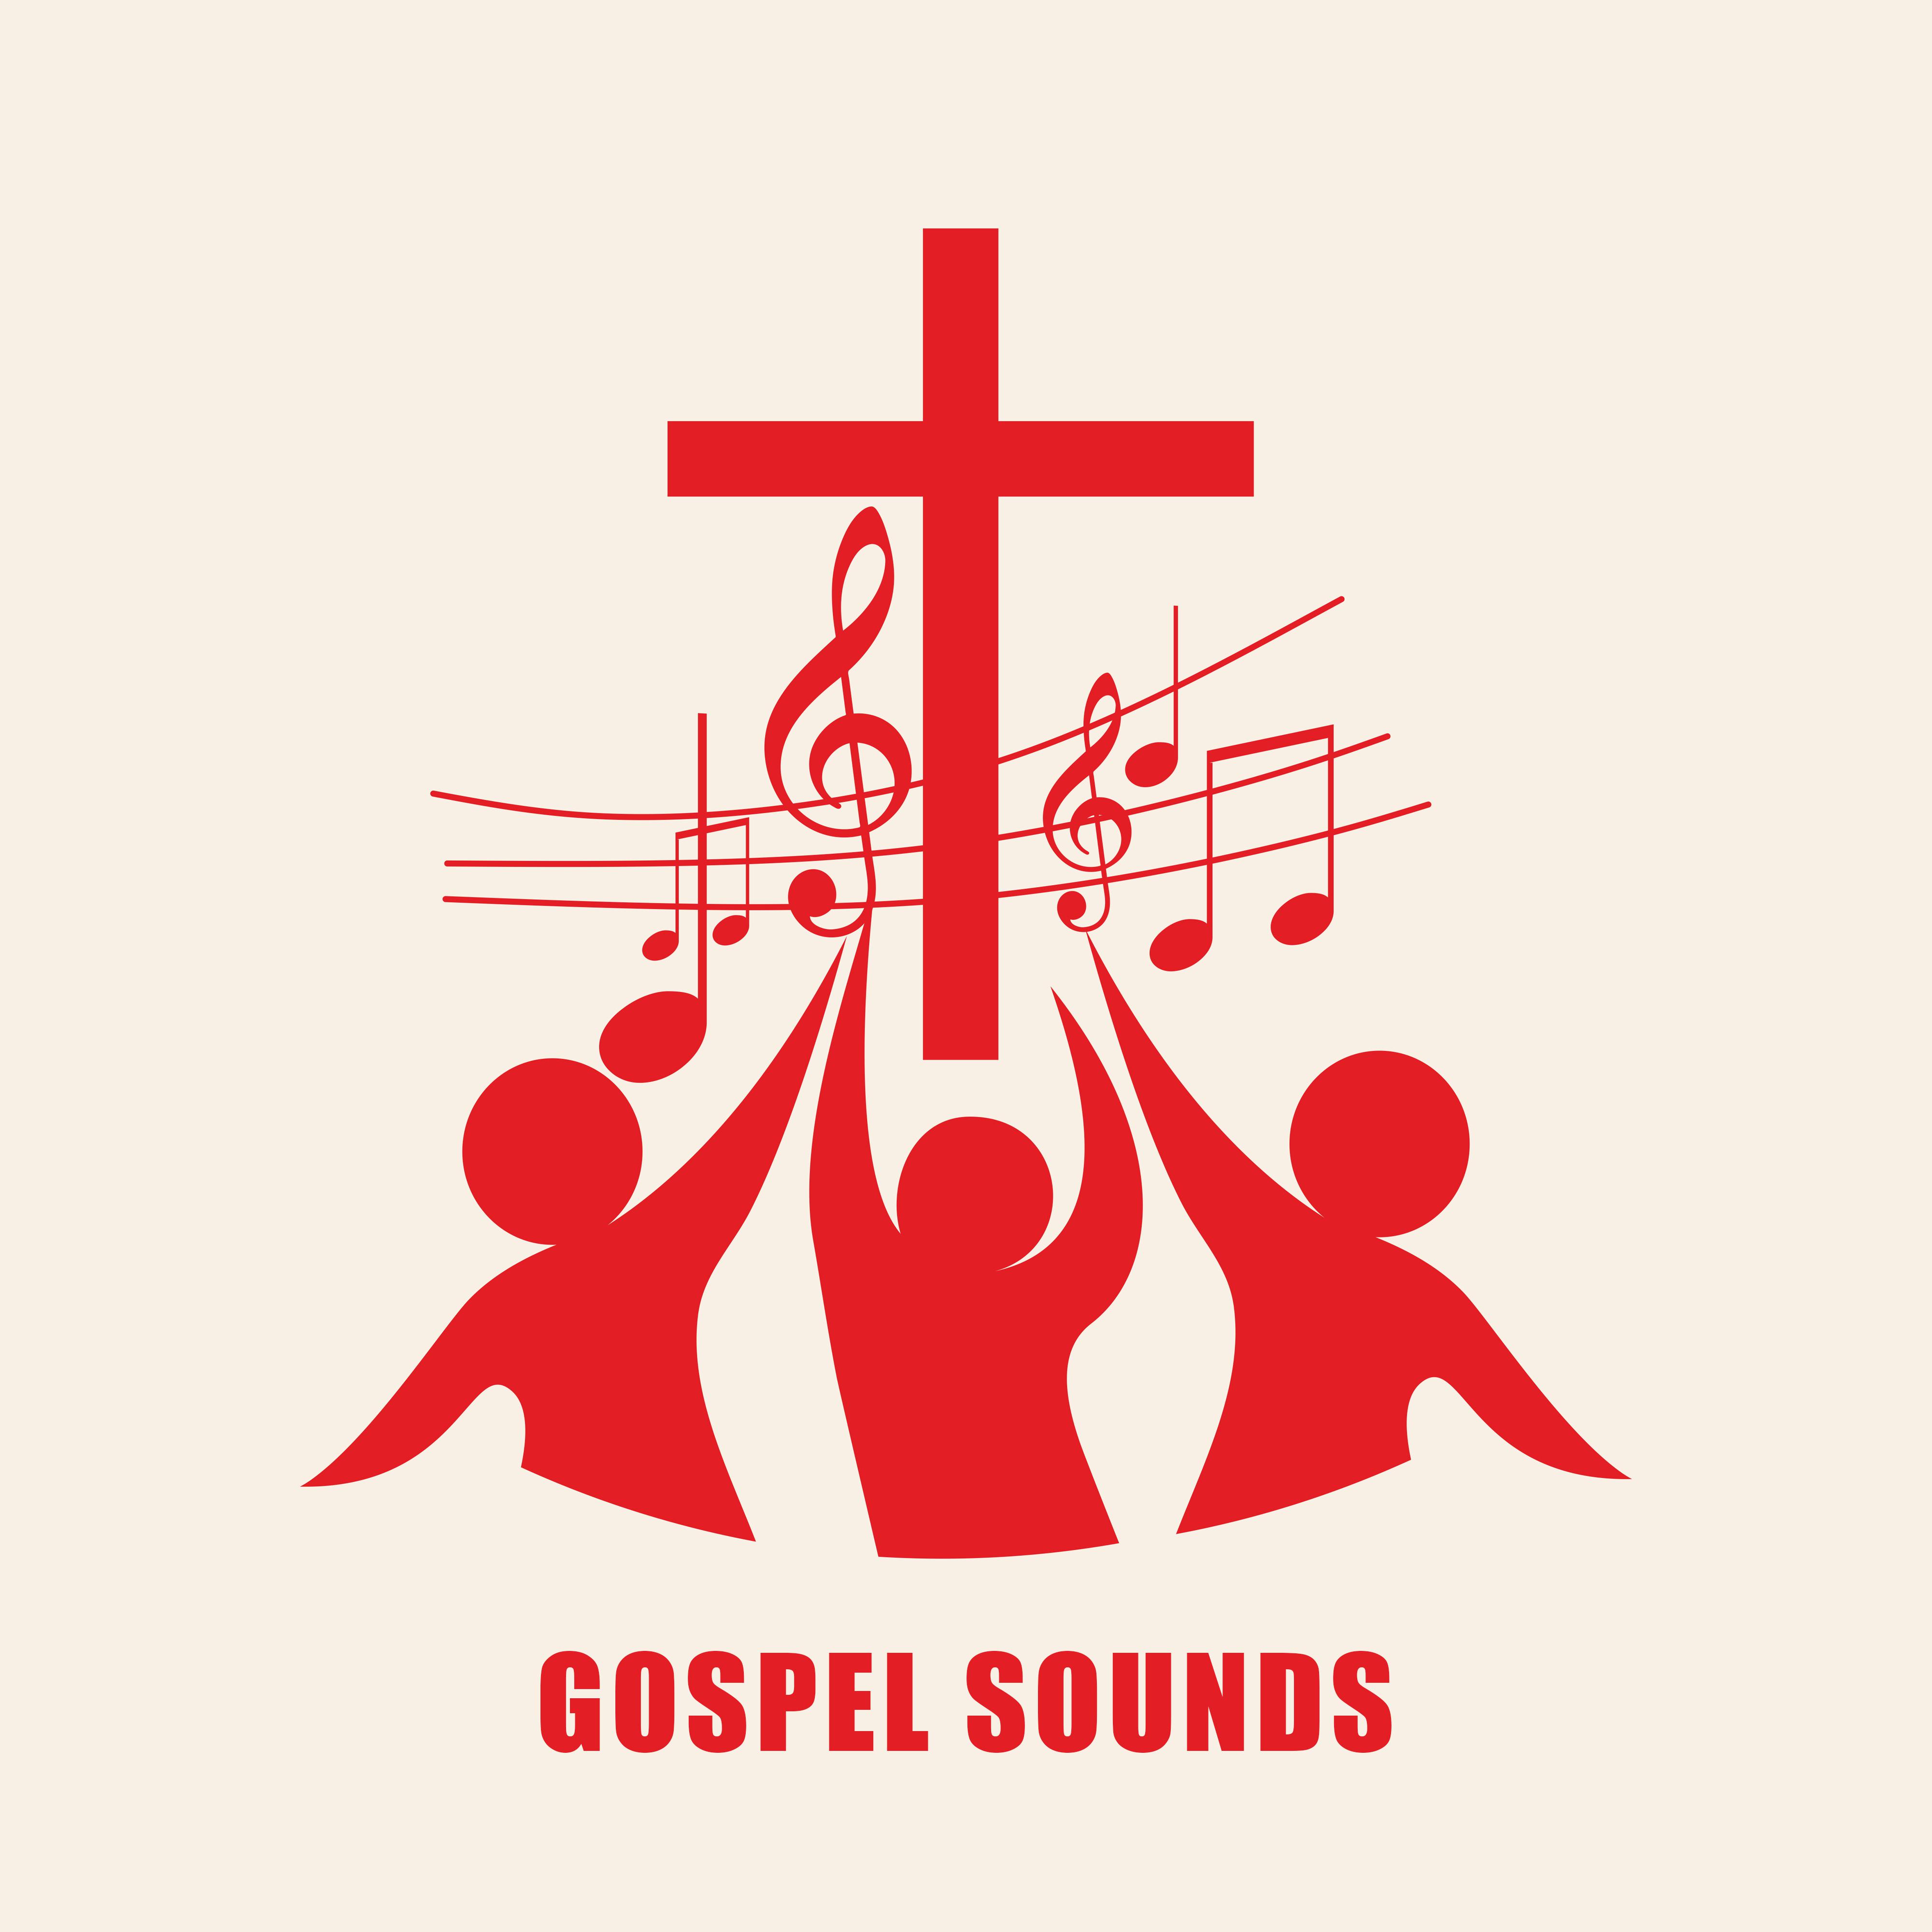 Gospel Sounds: 15 Lively Instrumental Jazz Songs in the Background for Prayer, Worship and Dance for the Glory of God